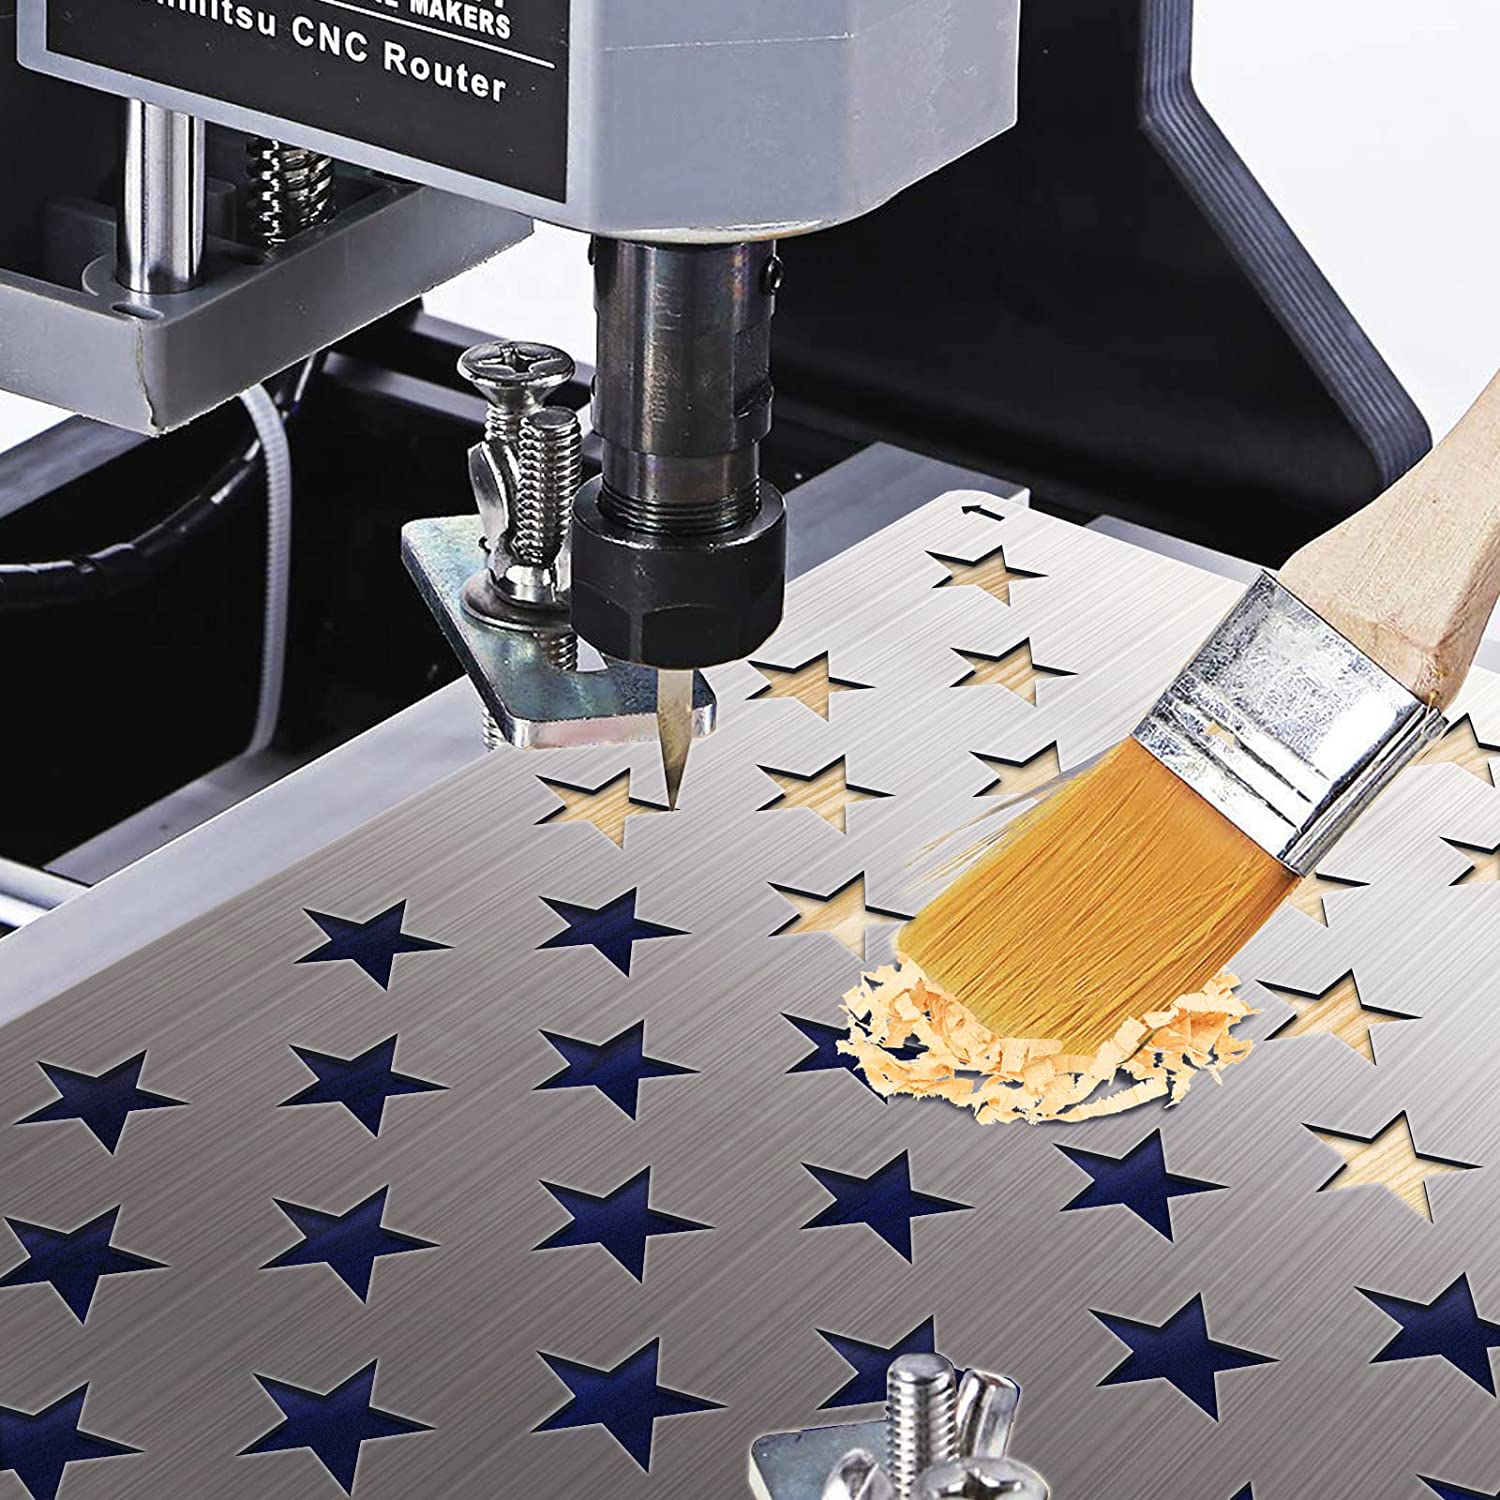 Custom Metal American Flag 201 Stainless Steel 50 Stars Stencil, for Carving Stars on Wood, Fabric, Paper